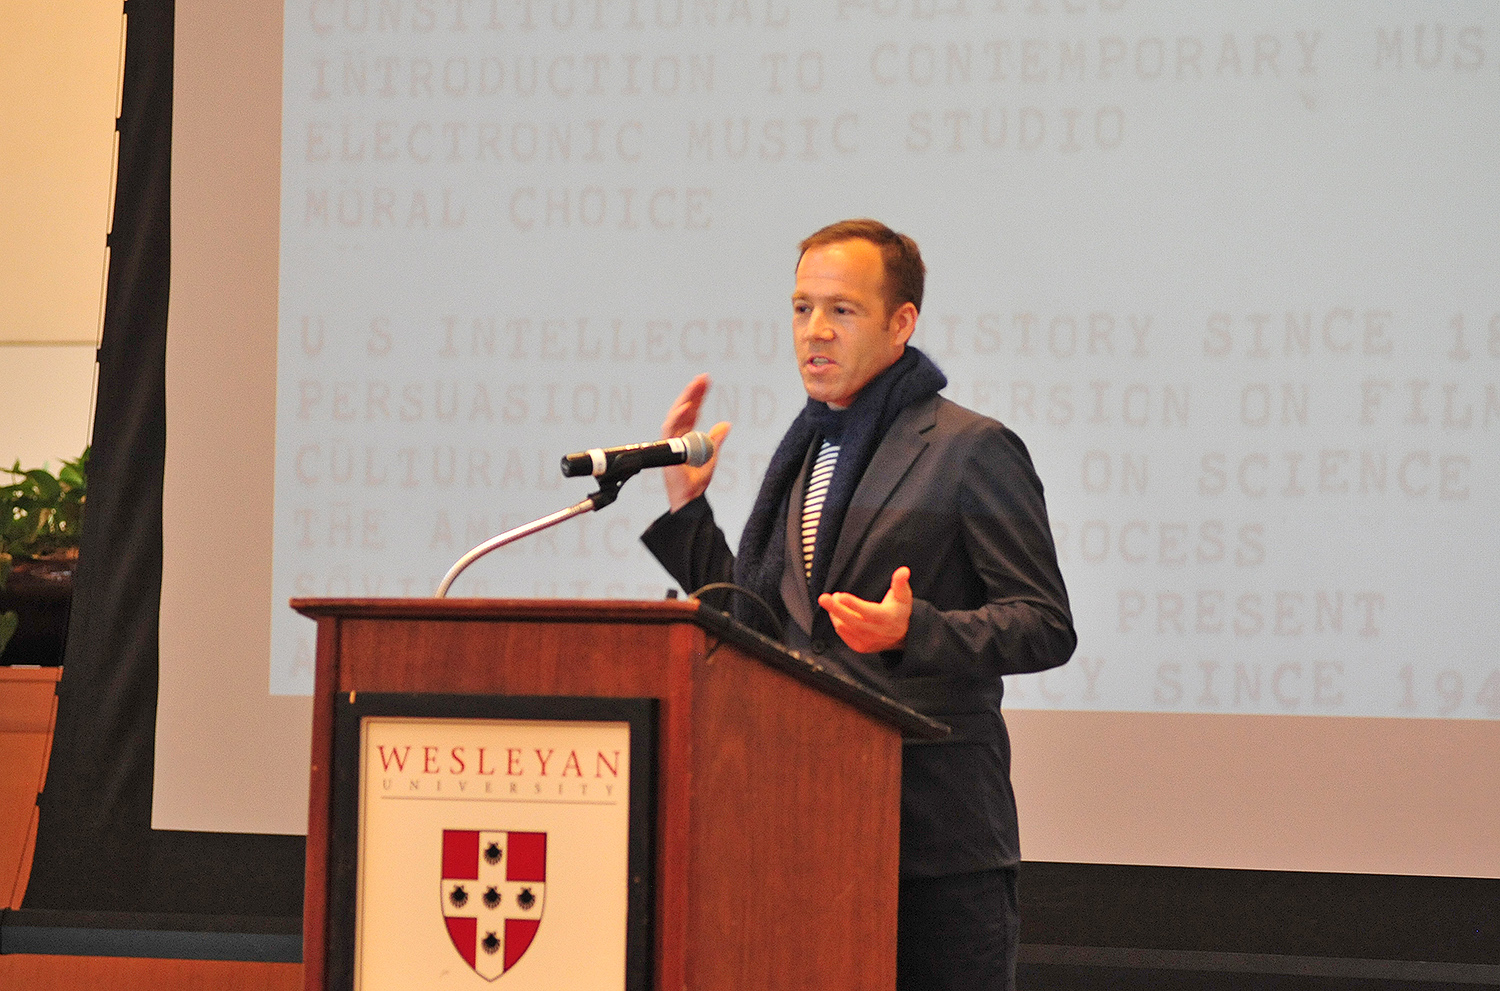 Luke Wood '91, president of Beats by Dr. Dre, delivered the WesFest Alumni Keynote Speech on April 13 titled "Between Thought and Expression: My Wesleyan Education." Beats by Dr. Dre is a premium brand of headphones and speakers that was acquired by Apple in 2014. A producer, guitarist, and music industry veteran with more than 20 years of experience, Wood has been involved with Beats since its early days, officially joining the company in 2011. Wood began his career with Geffen Records in 1991 as a director of publicity, representing such bands as Nirvana and Sonic Youth. Luke Wood '91, president of Beats by Dr. Dre, delivered the WesFest Alumni Keynote Speech on April 13 titled "Between Thought and Expression: My Wesleyan Education." Beats by Dr. Dre is a premium brand of headphones and speakers that was acquired by Apple in 2014. A producer, guitarist, and music industry veteran with more than 20 years of experience, Wood has been involved with Beats since its early days, officially joining the company in 2011. Wood began his career with Geffen Records in 1991 as a director of publicity, representing such bands as Nirvana and Sonic Youth. 